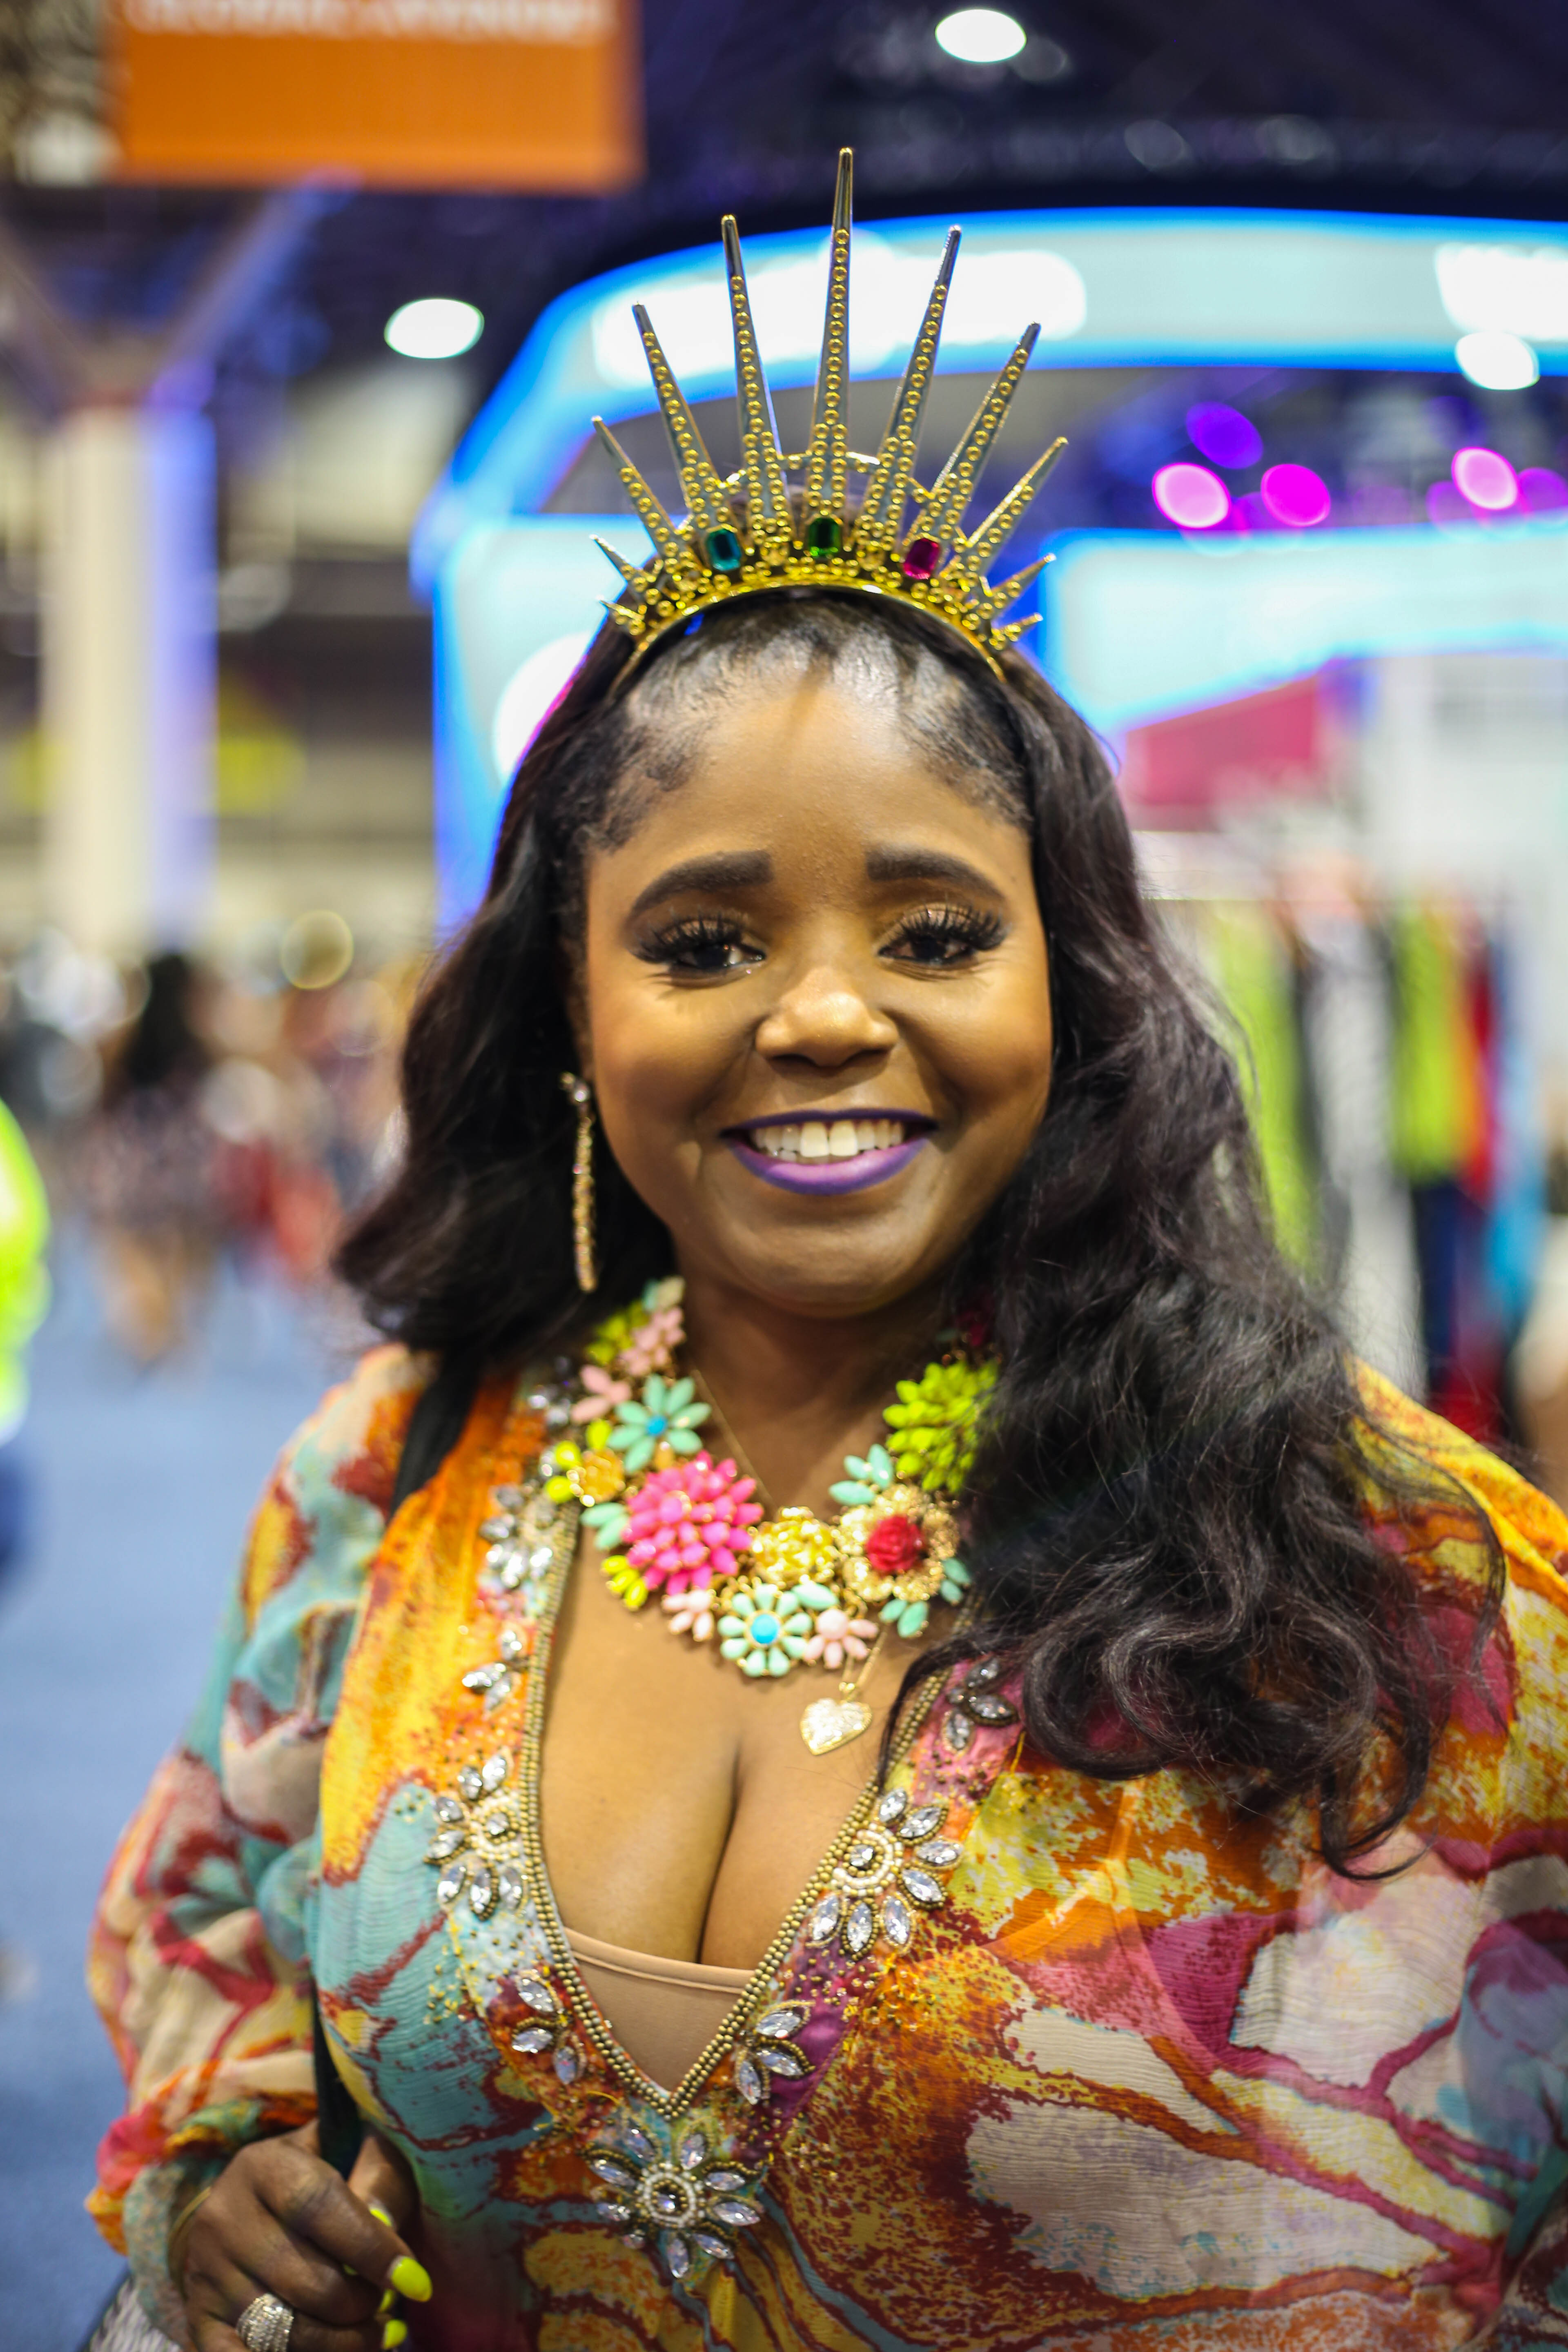 Makeup Trends Were A Beauty Must At This Year’s Essence Festival